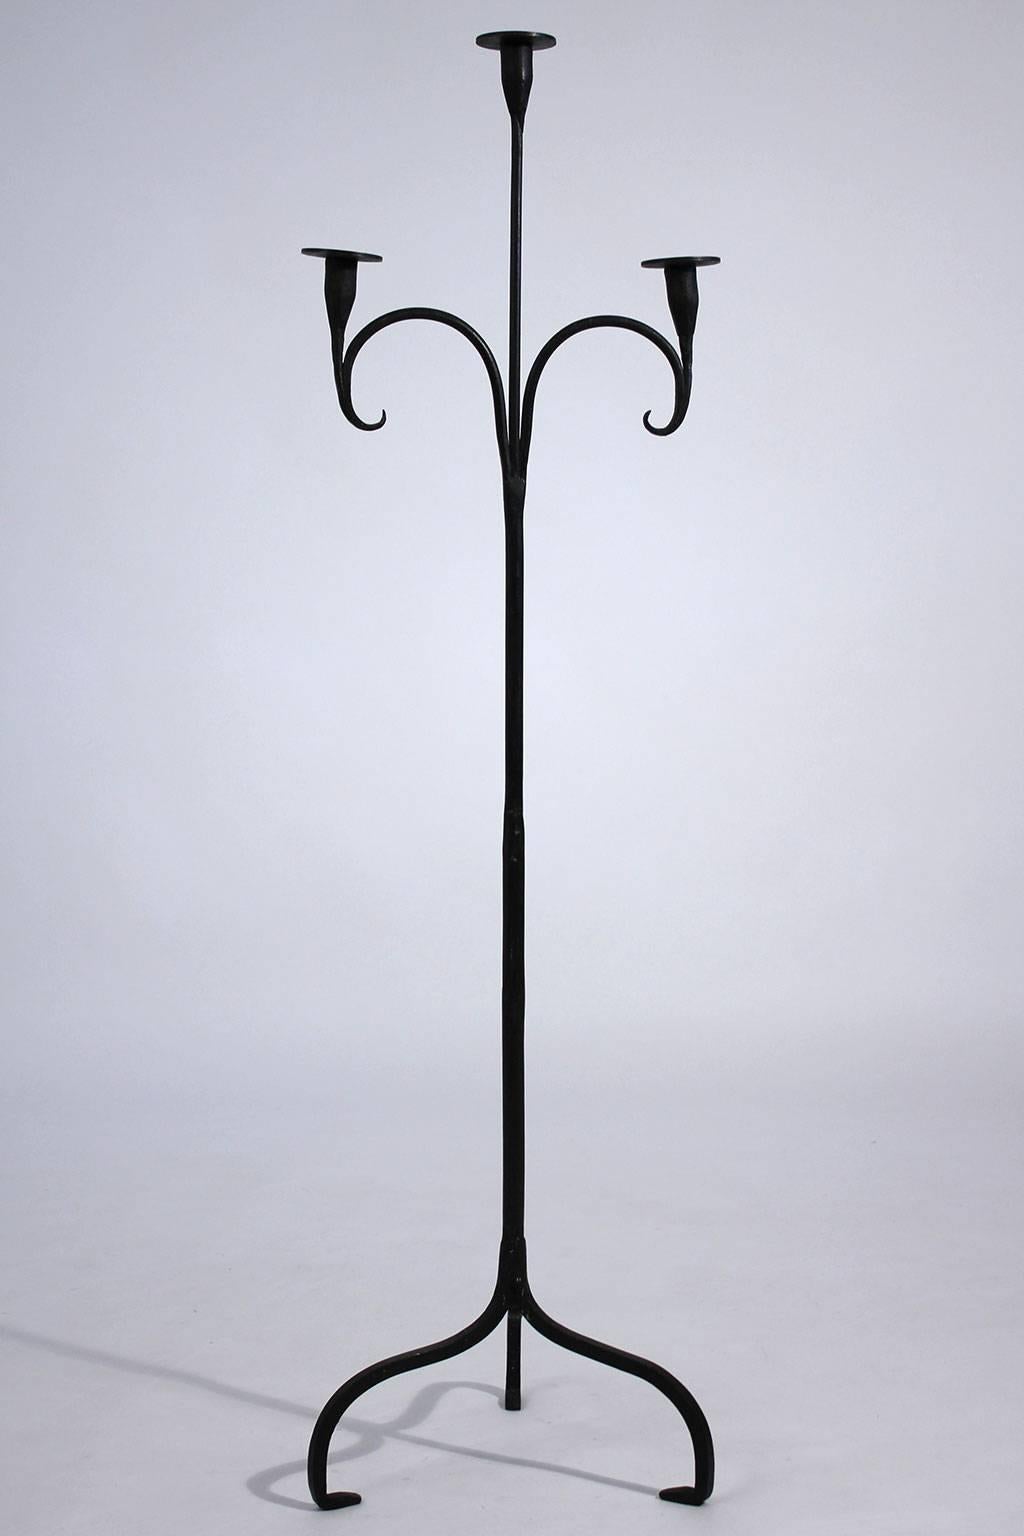 Hand-forged early California Rancho Monterey period wrought iron standing three candle candelabra. Condition is excellent and has a wonderful design. Has original painted surface.